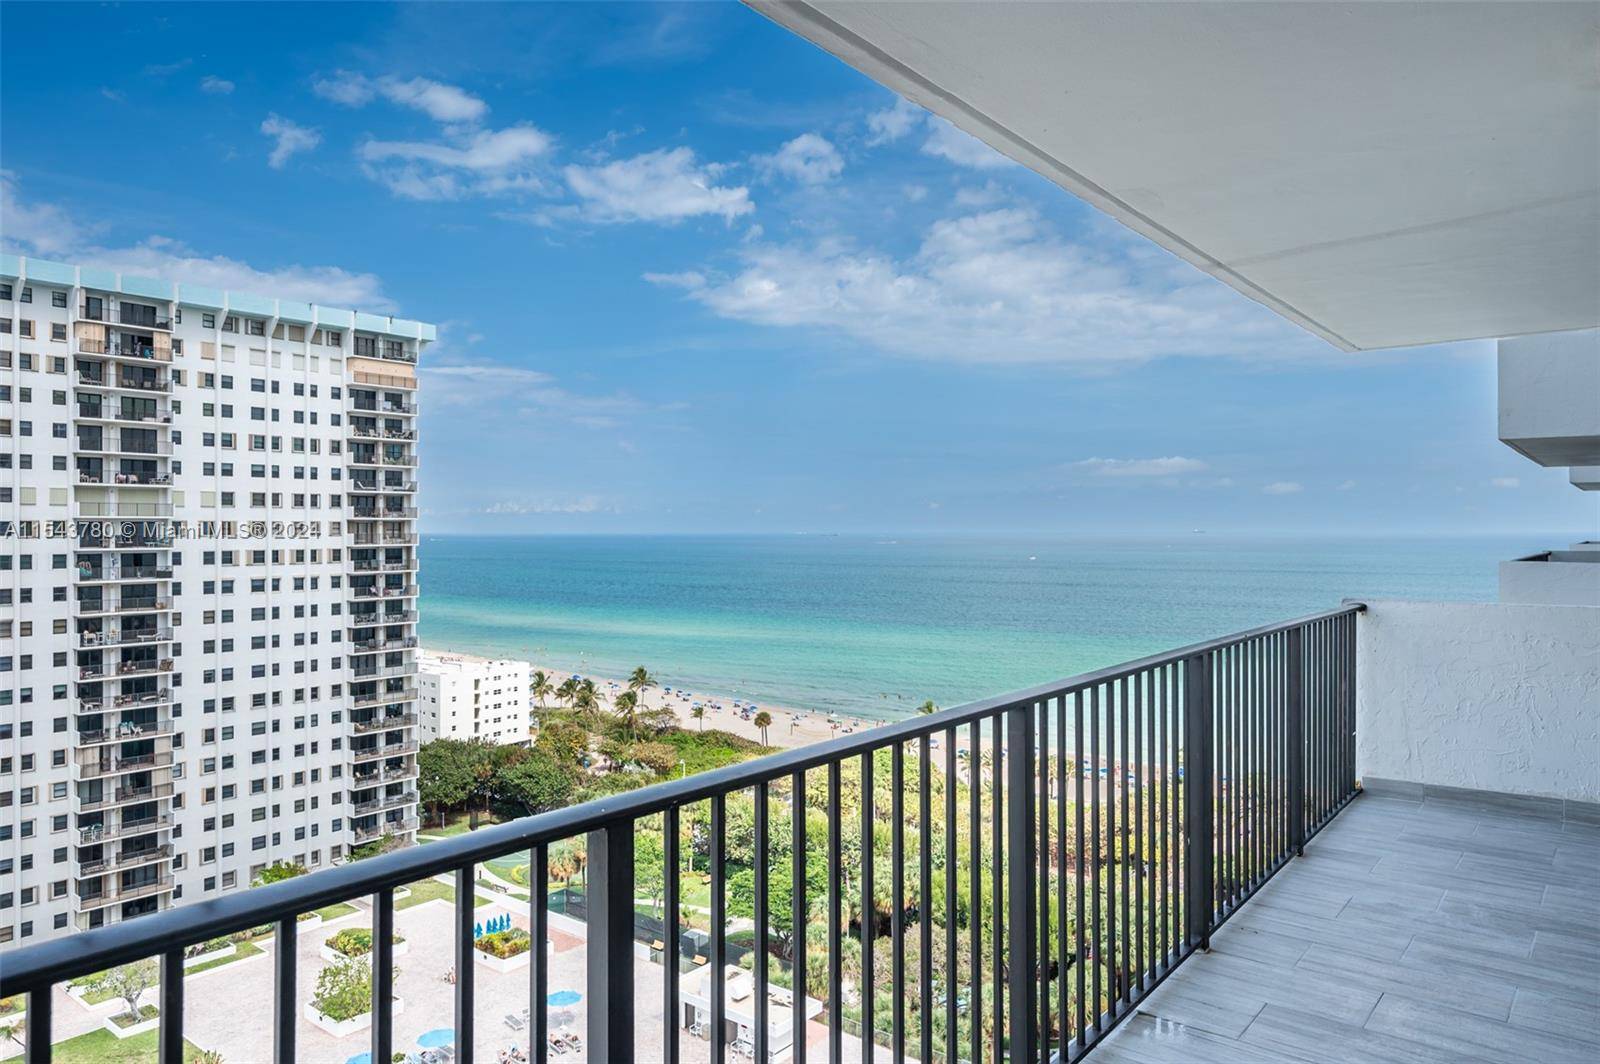 ENJOY SUNRISE TO SUNSET VIEWS FROM THIS HIGH FLOOR 2 BED 2BATH CONDO UNIT AT THE SUMMIT HOLLYWOOD BEACH.